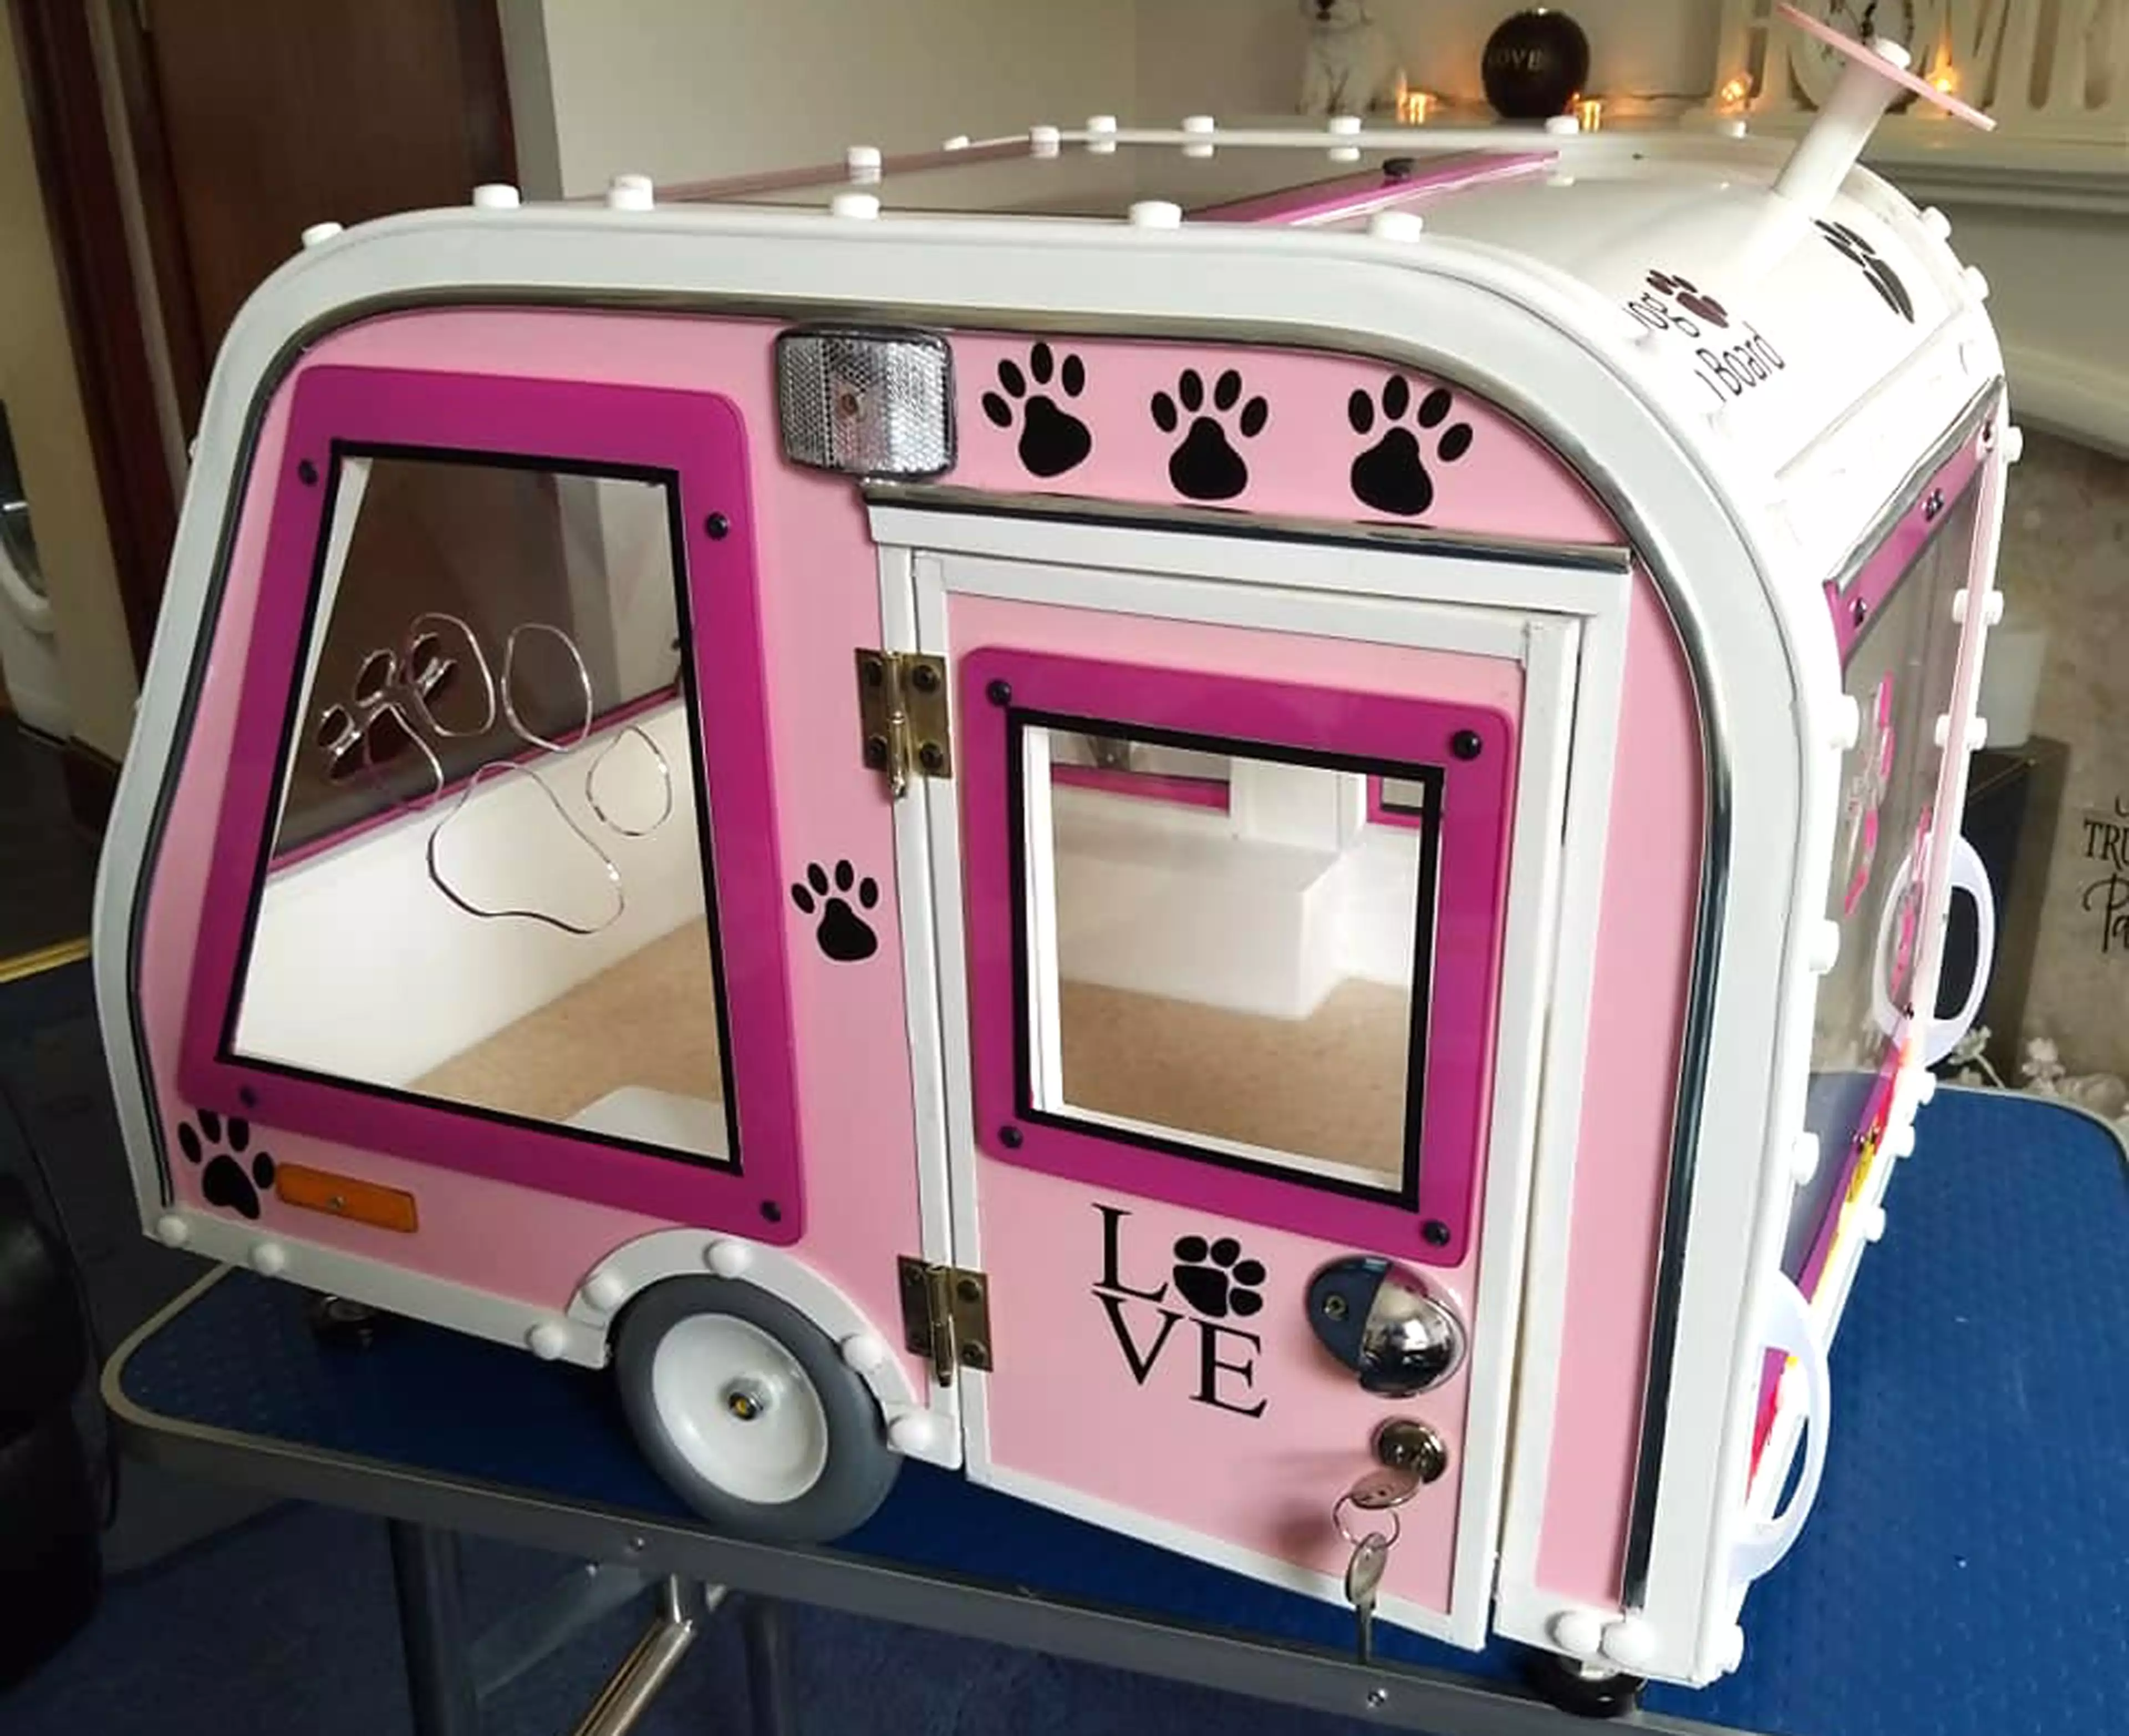 We need one of these for our pups ASAP (